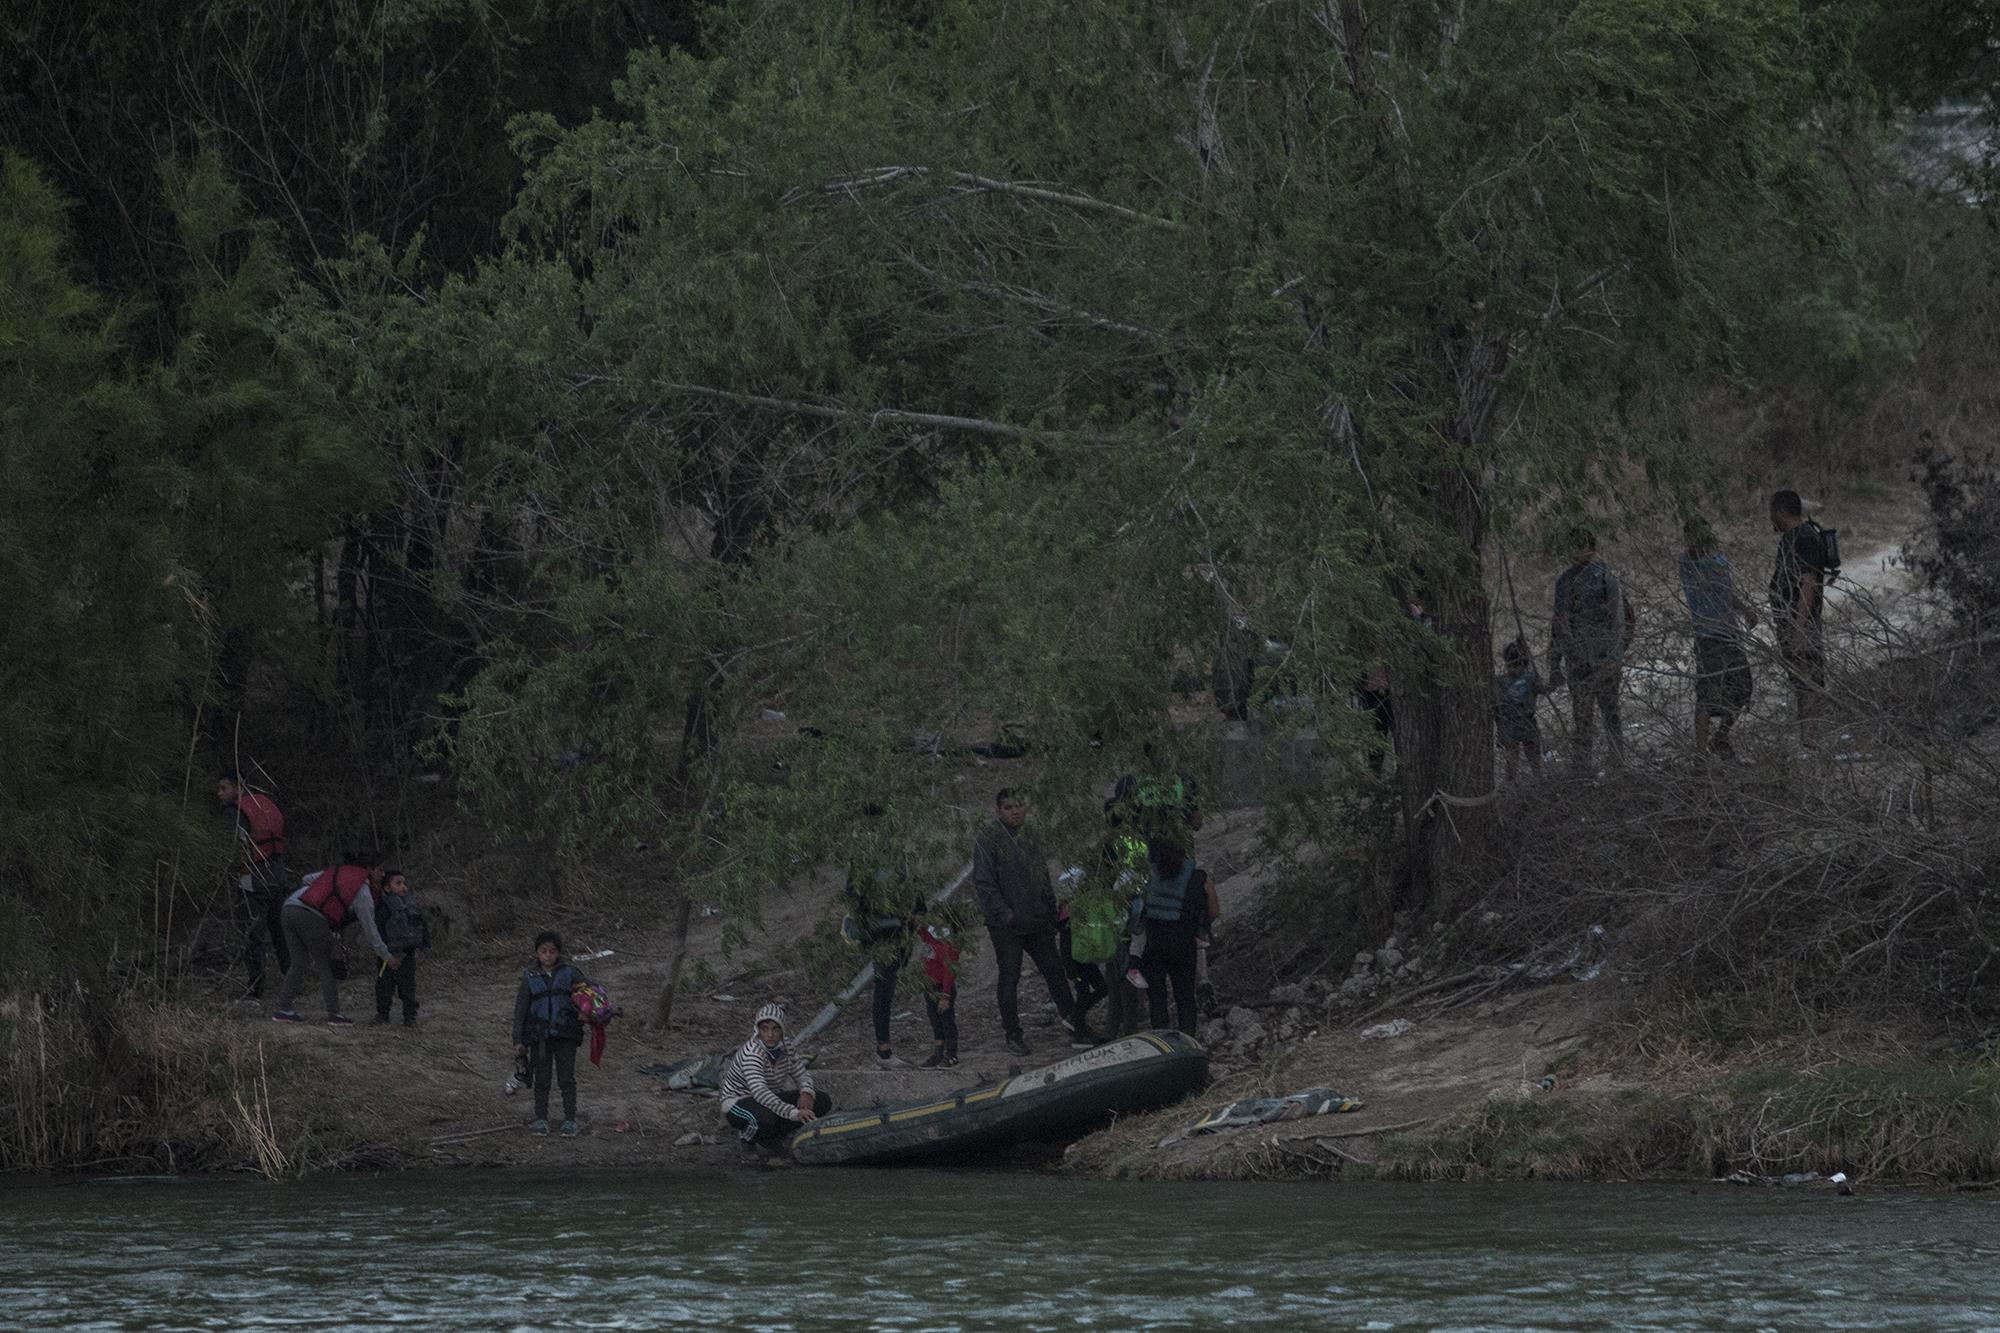 In the afternoon on Saturday, March 28, a large group of undocumented Central Americans attempted to cross the Rio Grande on the outskirts of Miguel Alemán, a border town in the northeastern Mexican state of Tamaulipas. The coyotes spotted Border Patrol agents keeping watch on the U.S. side of the river and retreated. There were about 15 people waiting to cross the 102-meter-wide river channel, hoping to reach U.S. soil before Border Patrol boats could intercept them and arrest the coyotes piloting the rafts.